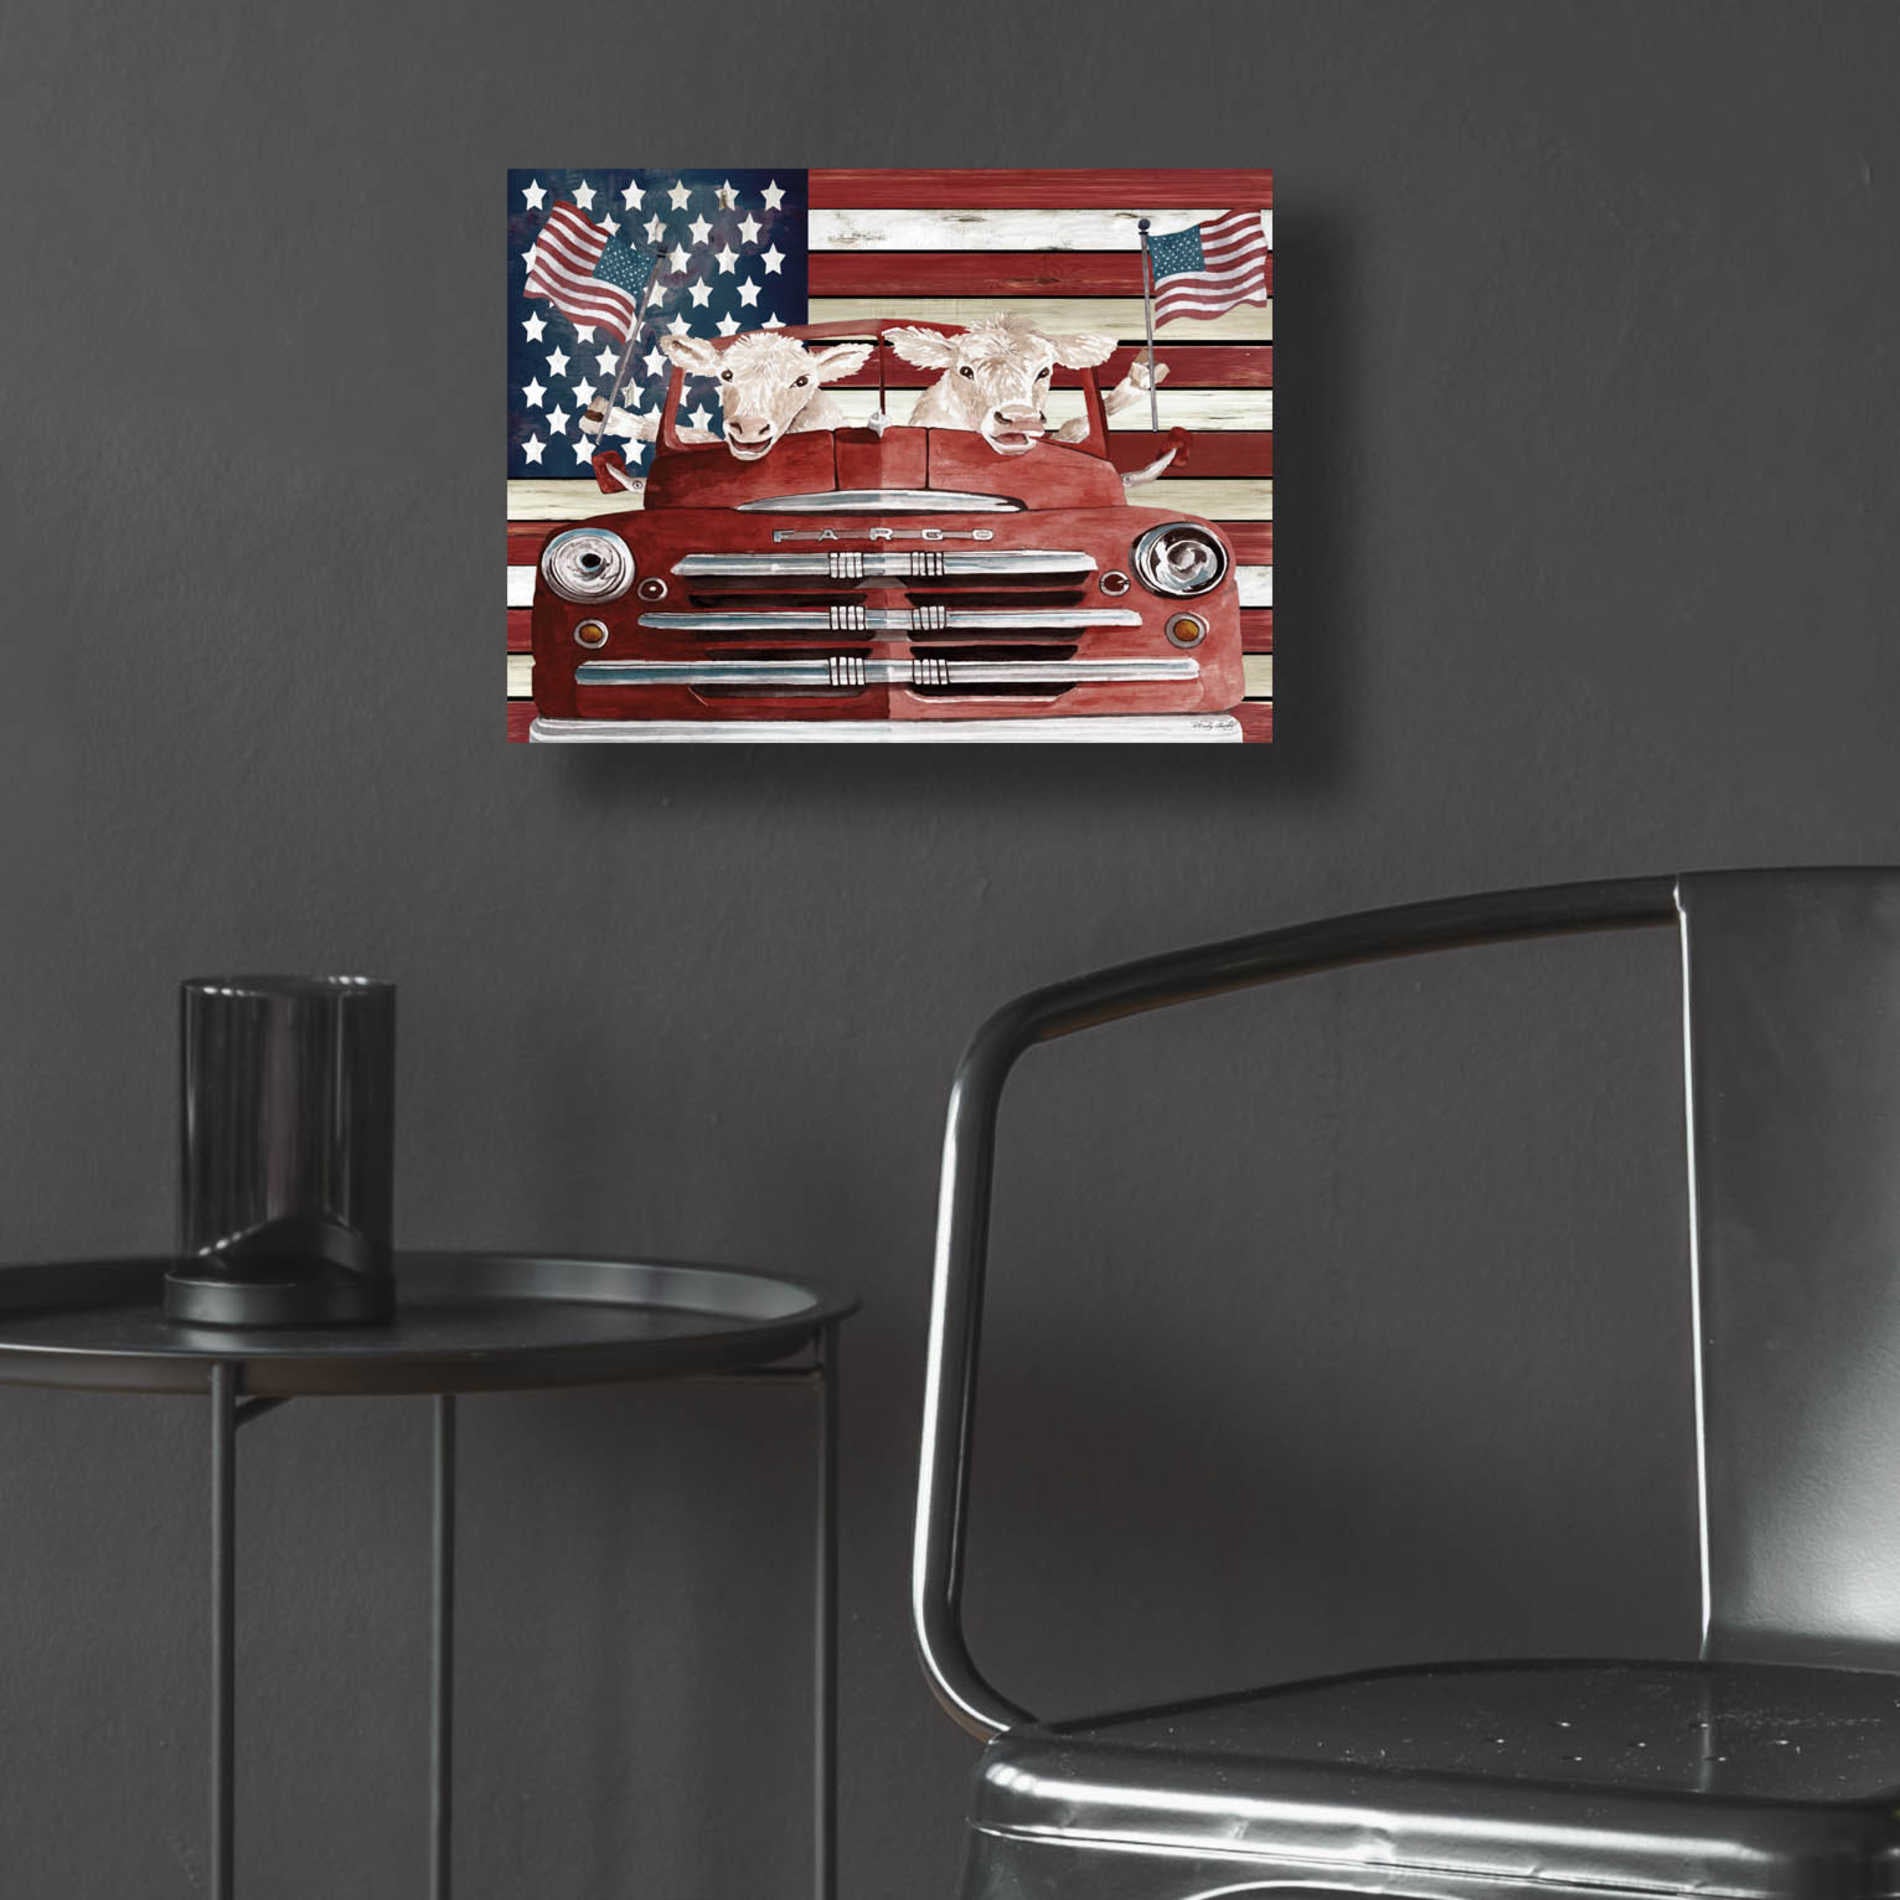 Epic Art 'Patriotic Cows' by Cindy Jacobs, Acrylic Glass Wall Art,16x12